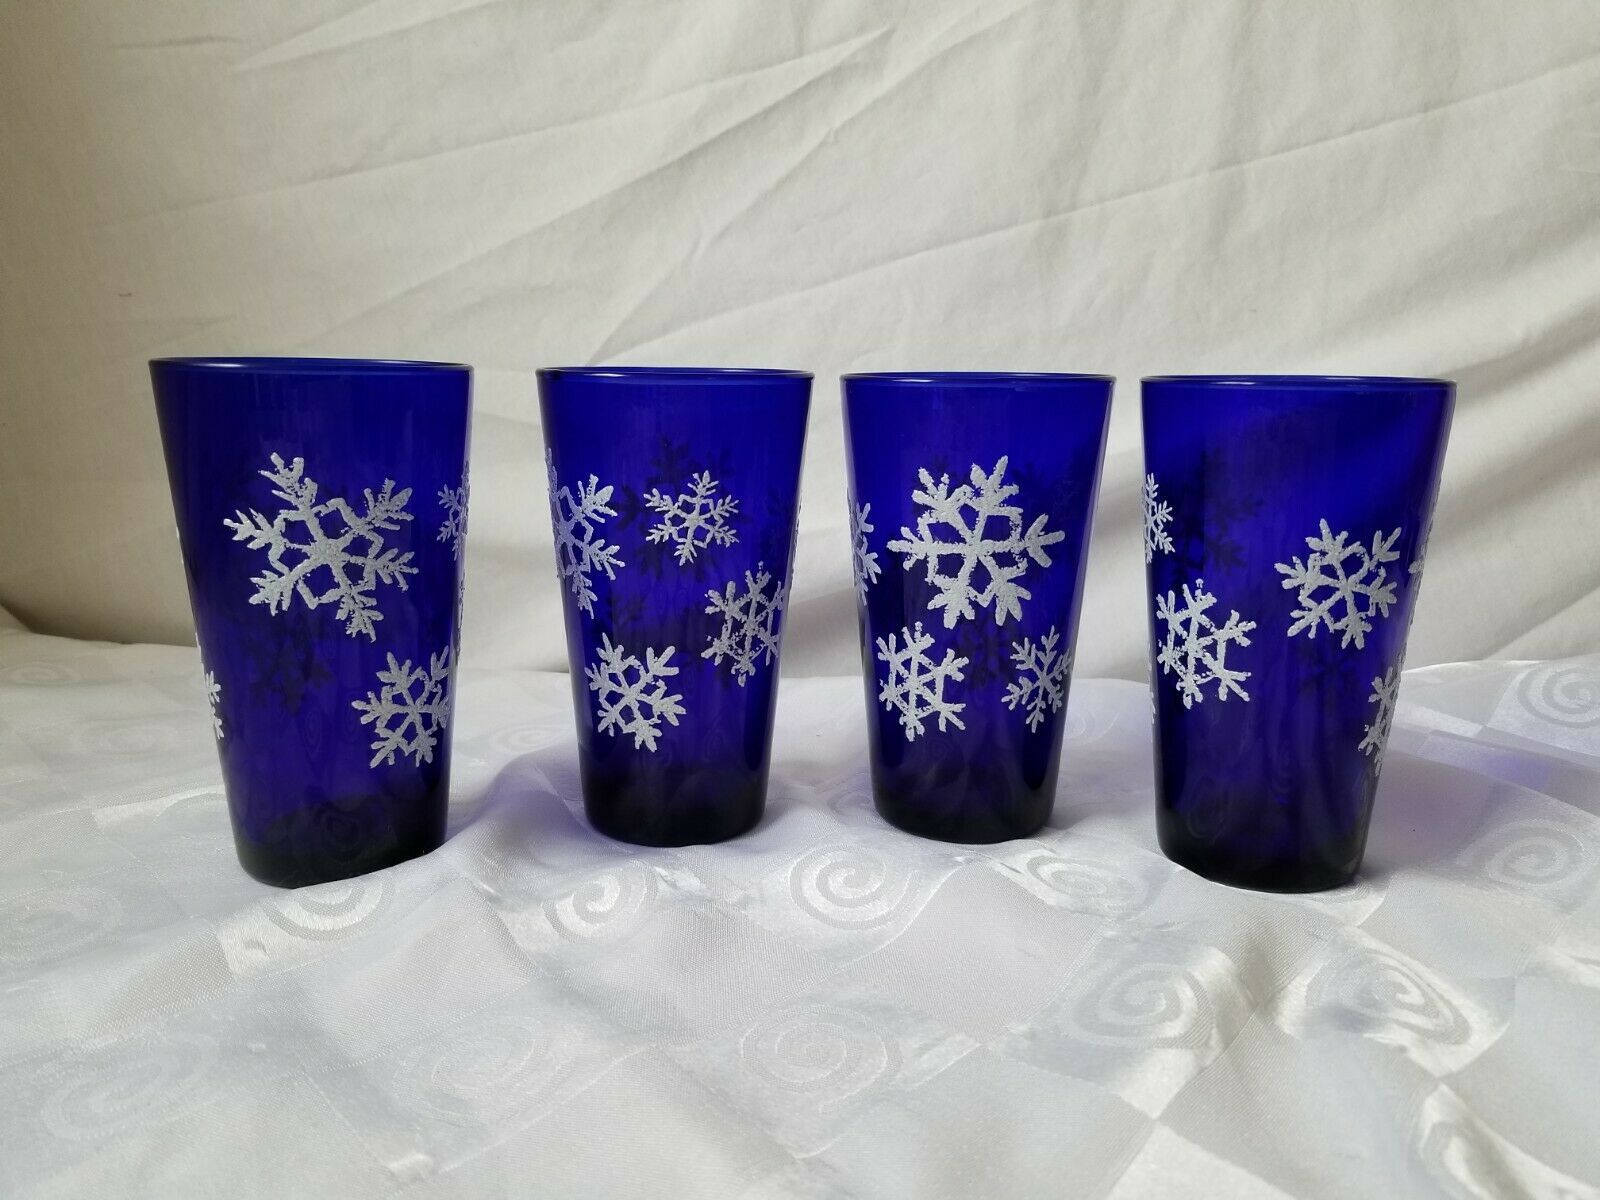 Libbey Cobalt Tumbler Highball Set of 4 Glass Overlay Rigaree Snowflakes Vintage - $37.00